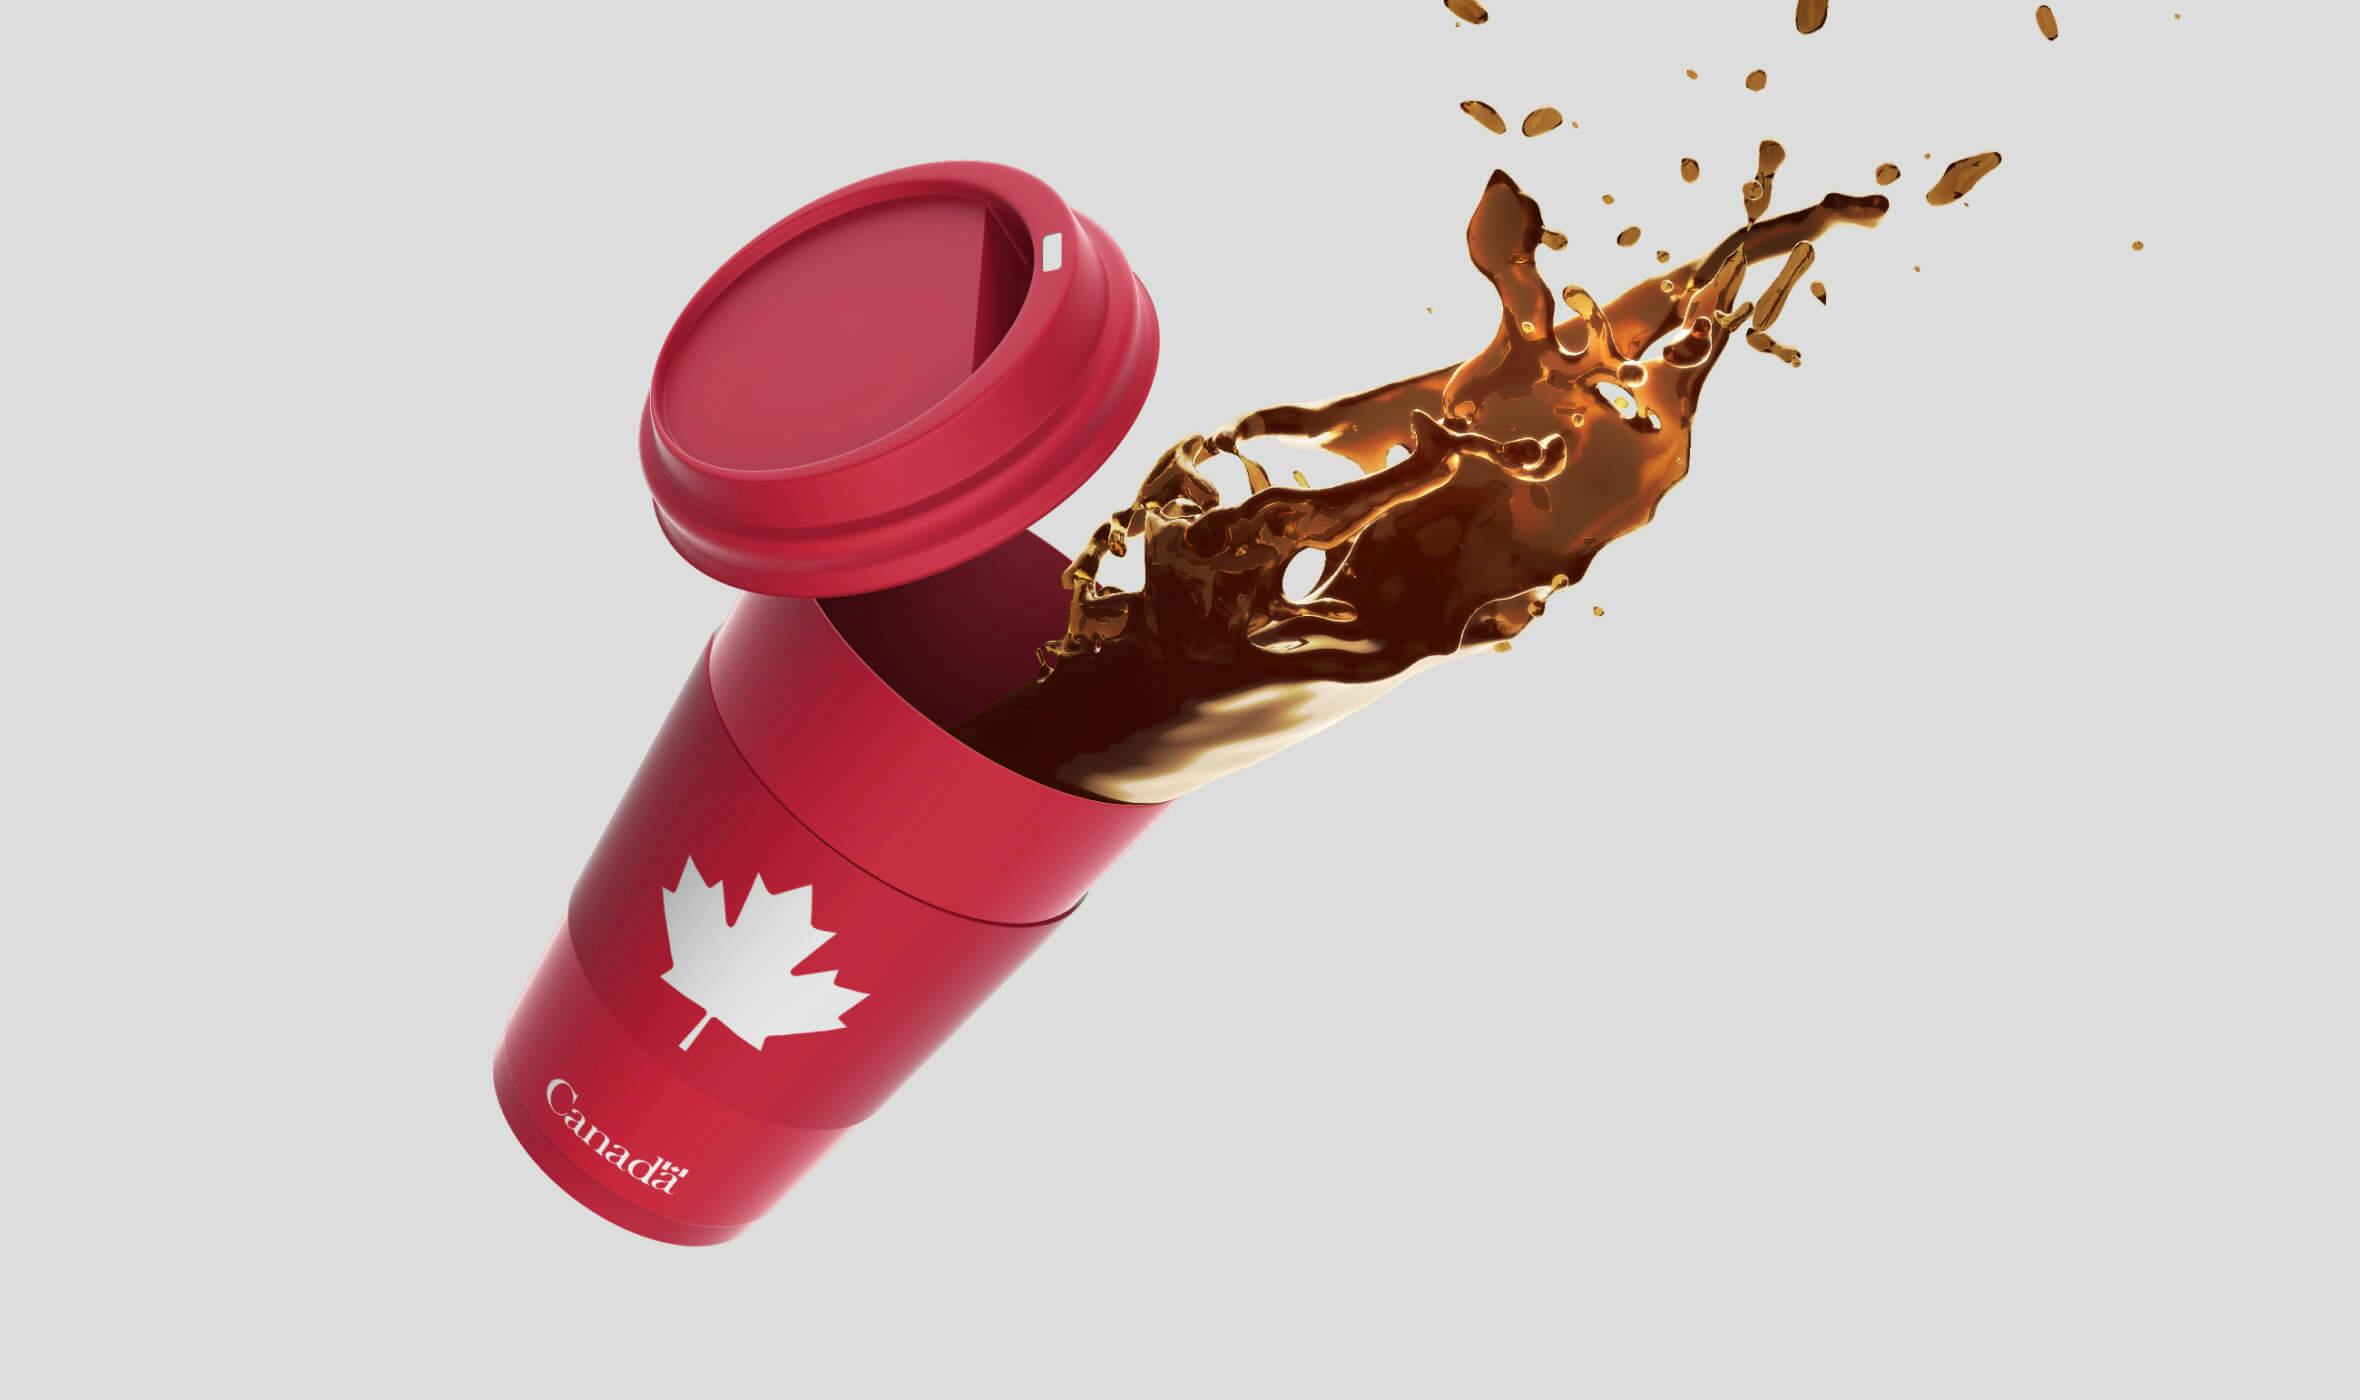 My creative playground, a miscellaneous collection of personal and experimental projects. A red tumbler donning a Canadian maple leaf icon with the Government of Canada branding is bursting open with an outpour of coffee.